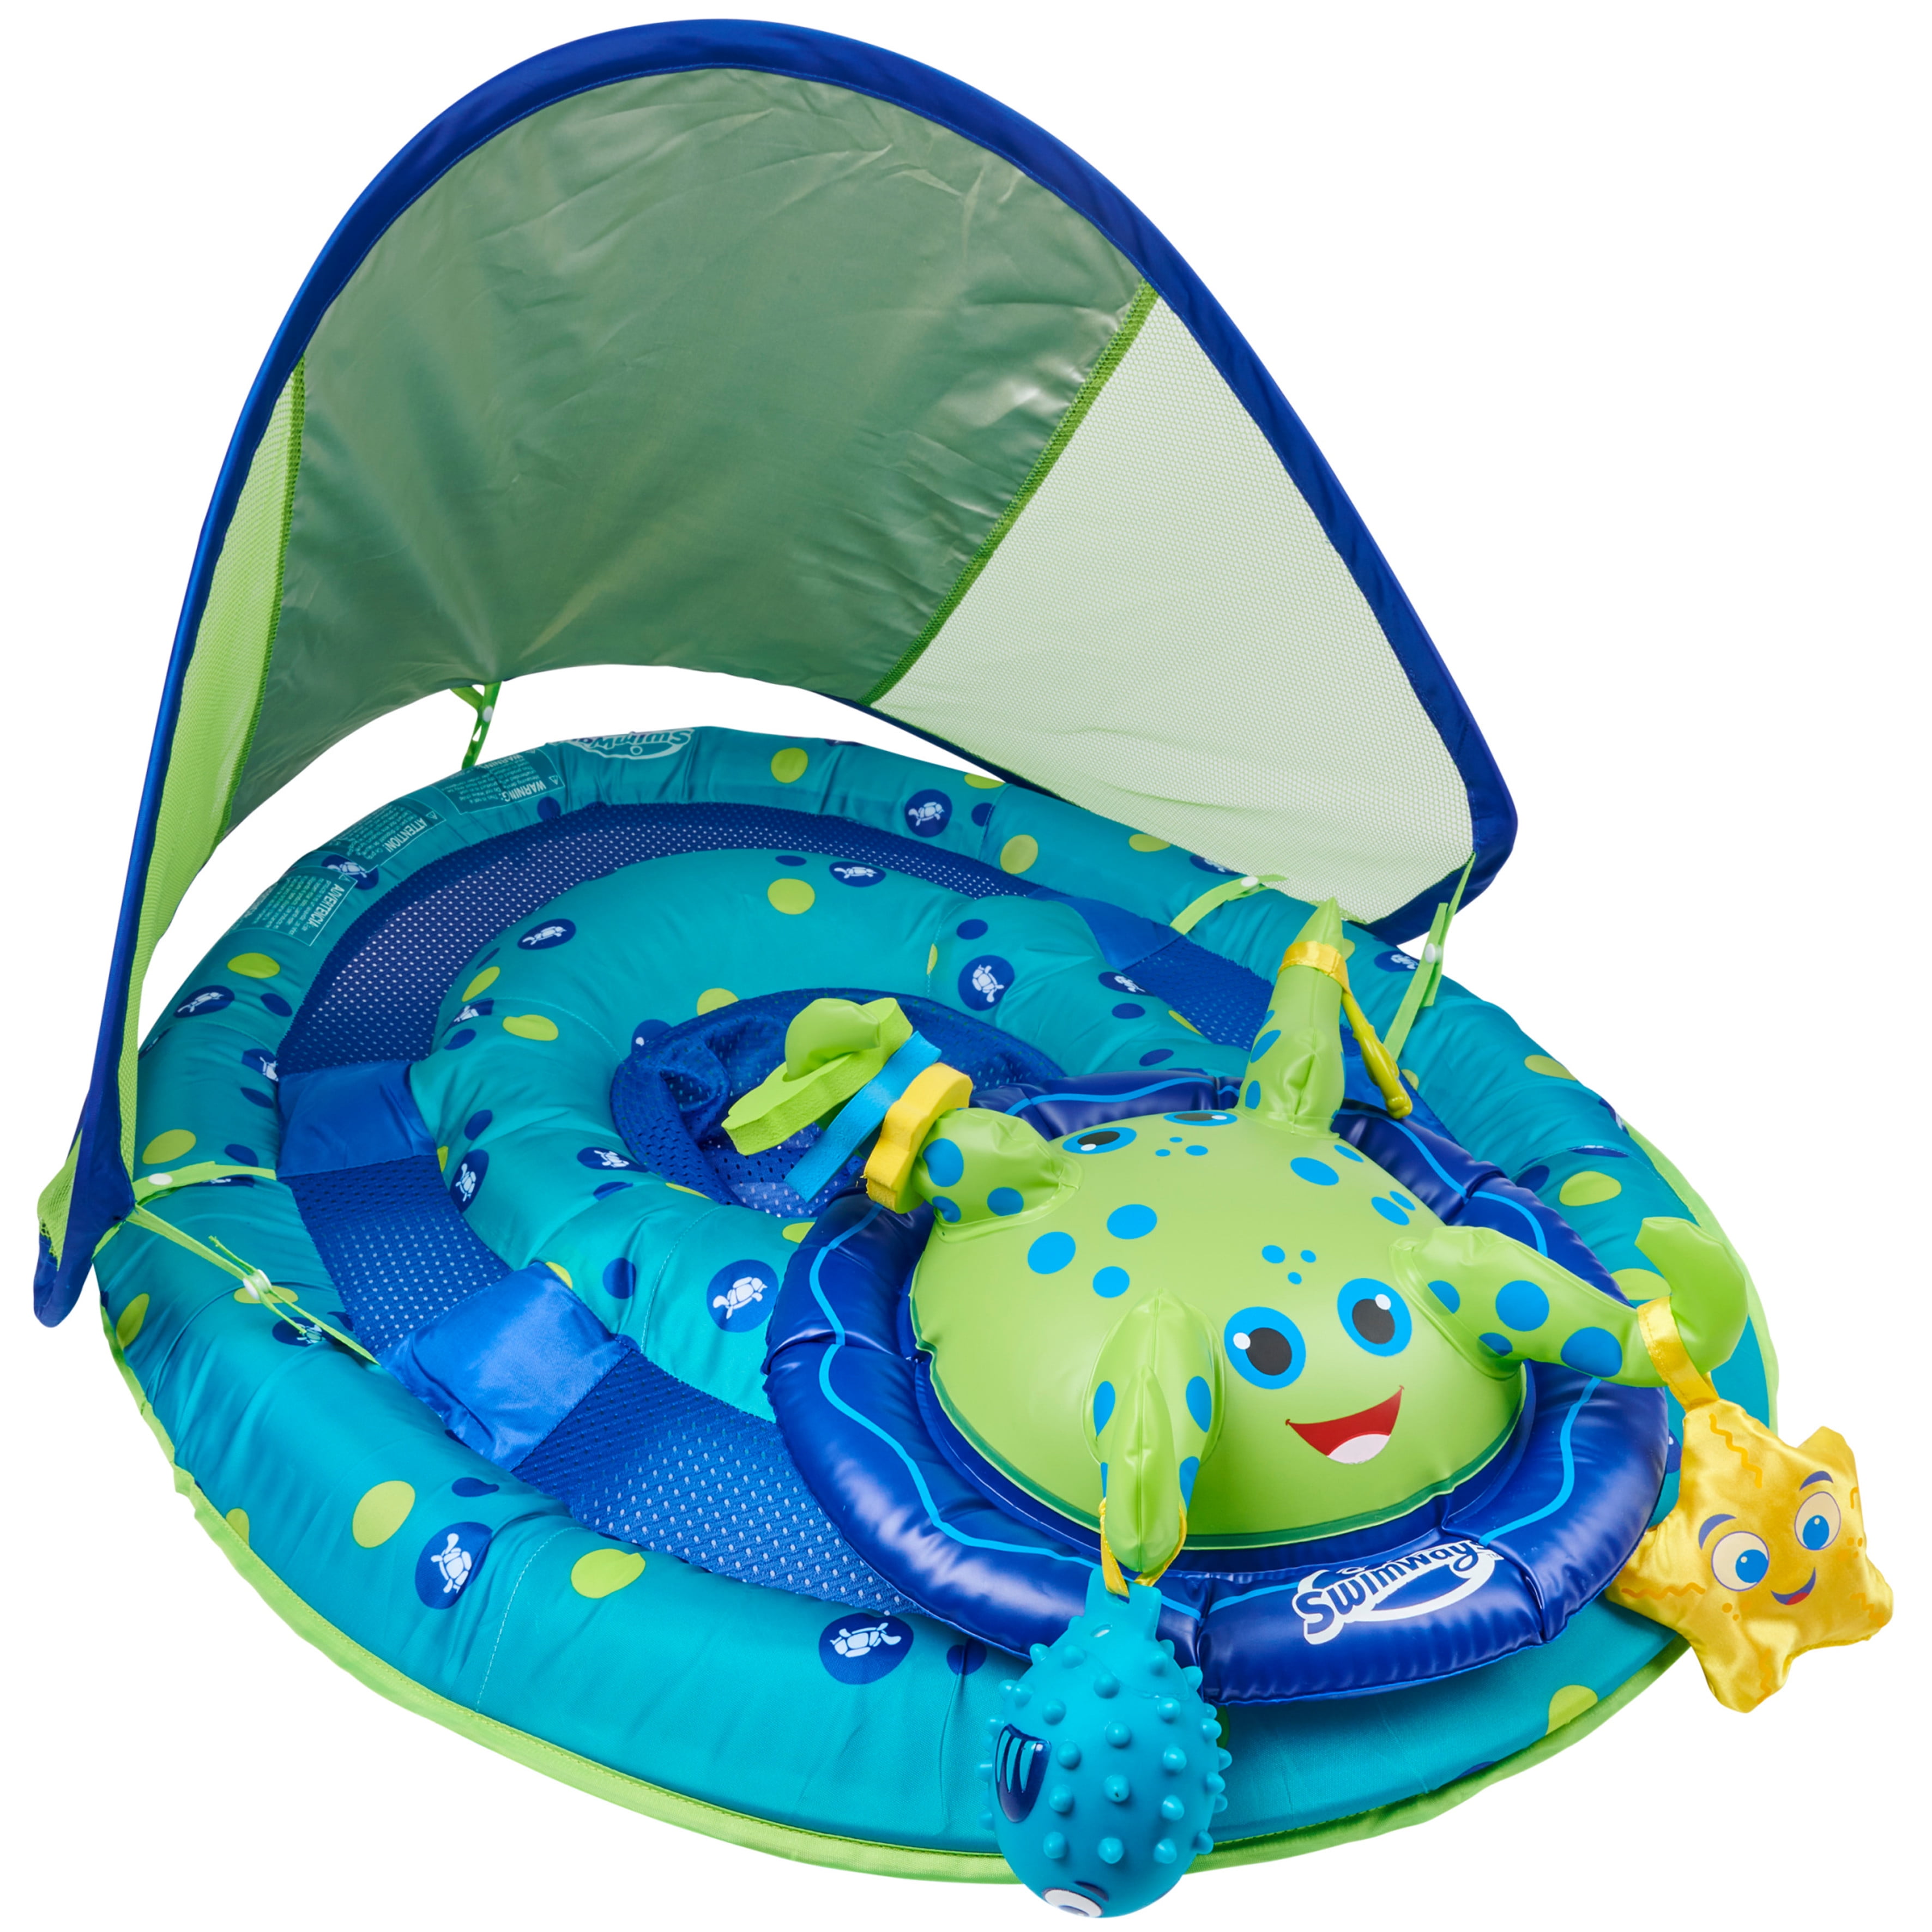 SwimWays Infant Baby Spring Float With Adjustable Sun Canopy 9-24 Months for sale online 